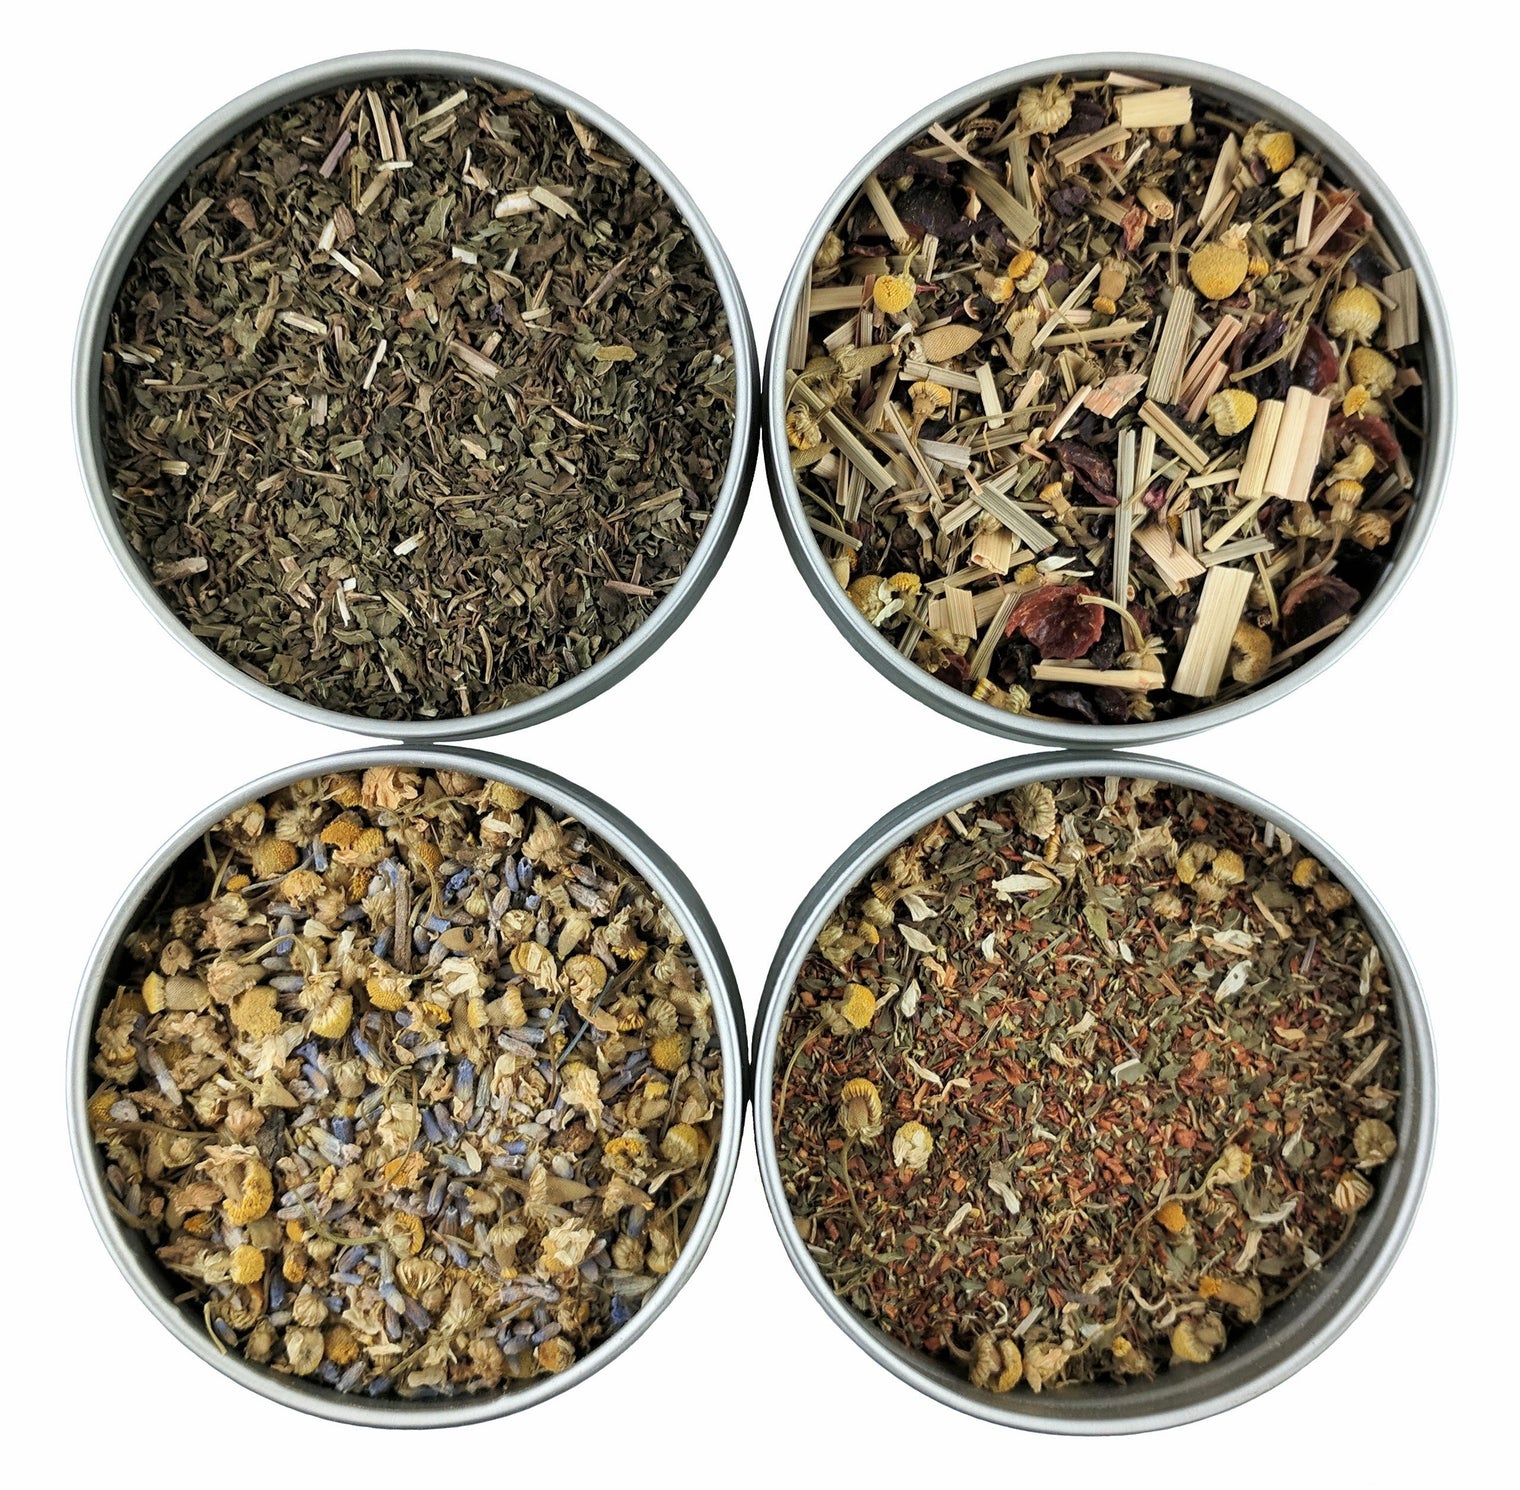 Holiday Gift Ideas for the One You Love: Tea Gifts | Heavenly Tea Leaves Blog